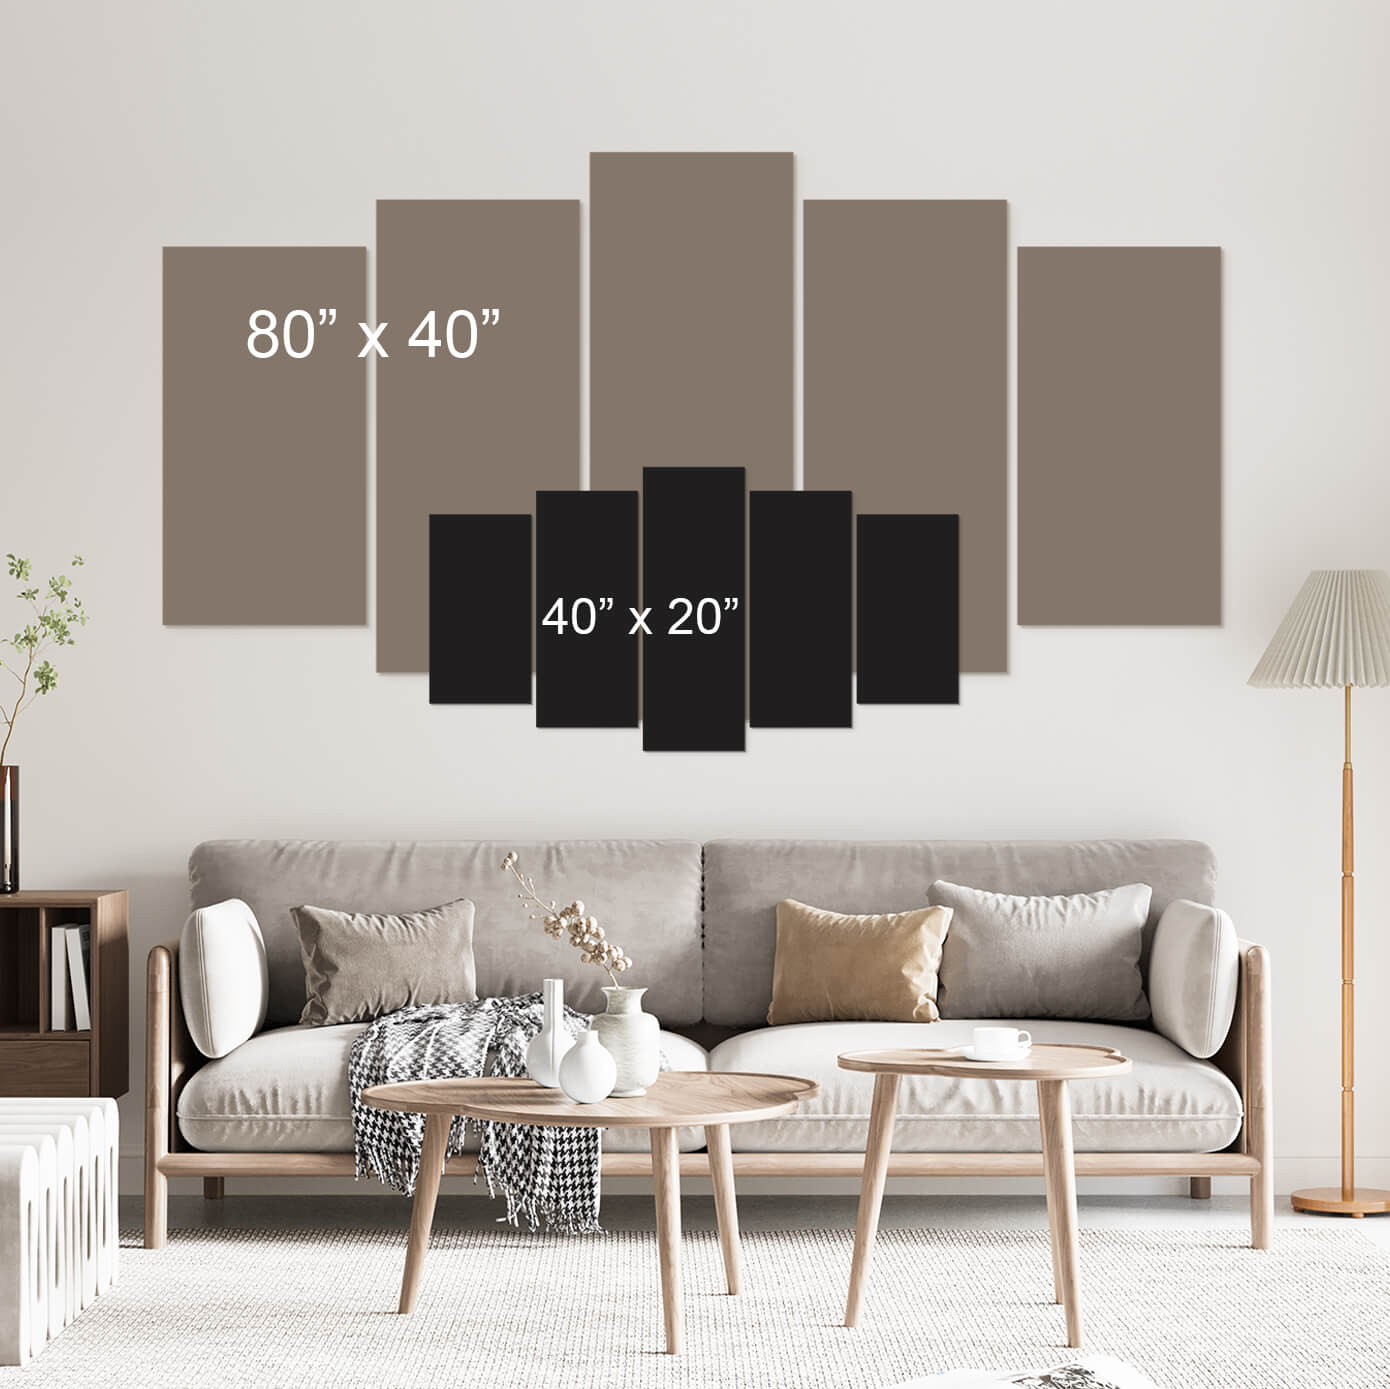 Stretched Canvas World Map Art - Picturesque World-Tiptophomedecor